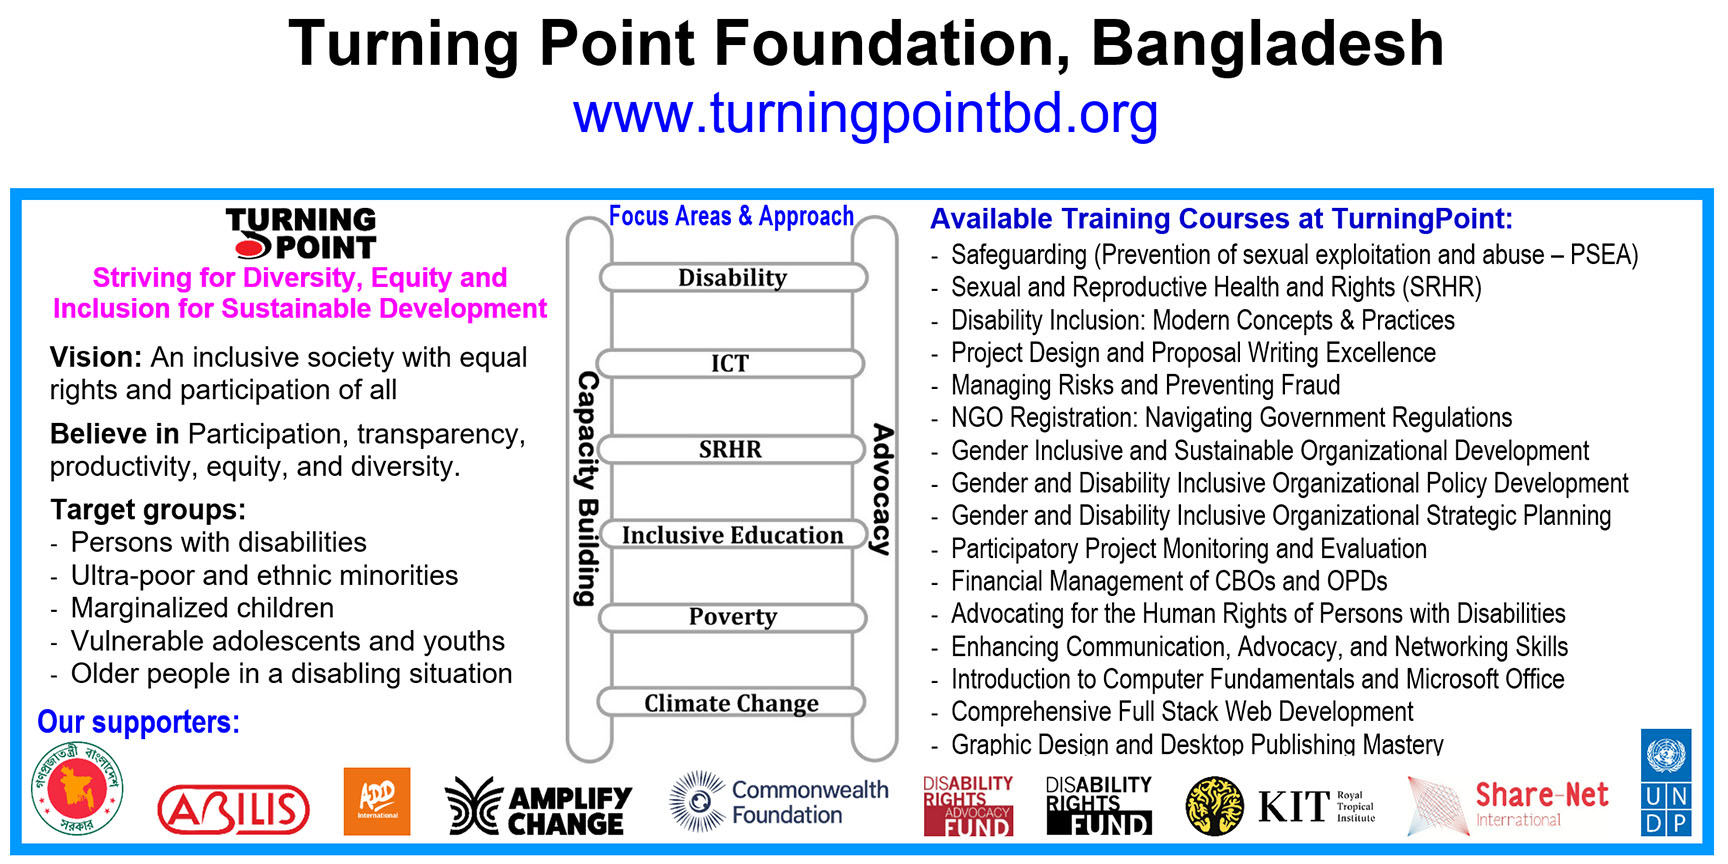 TurningPoint at a glance includiong vision, target groups, areas and approaches, available training and the logos of its donors